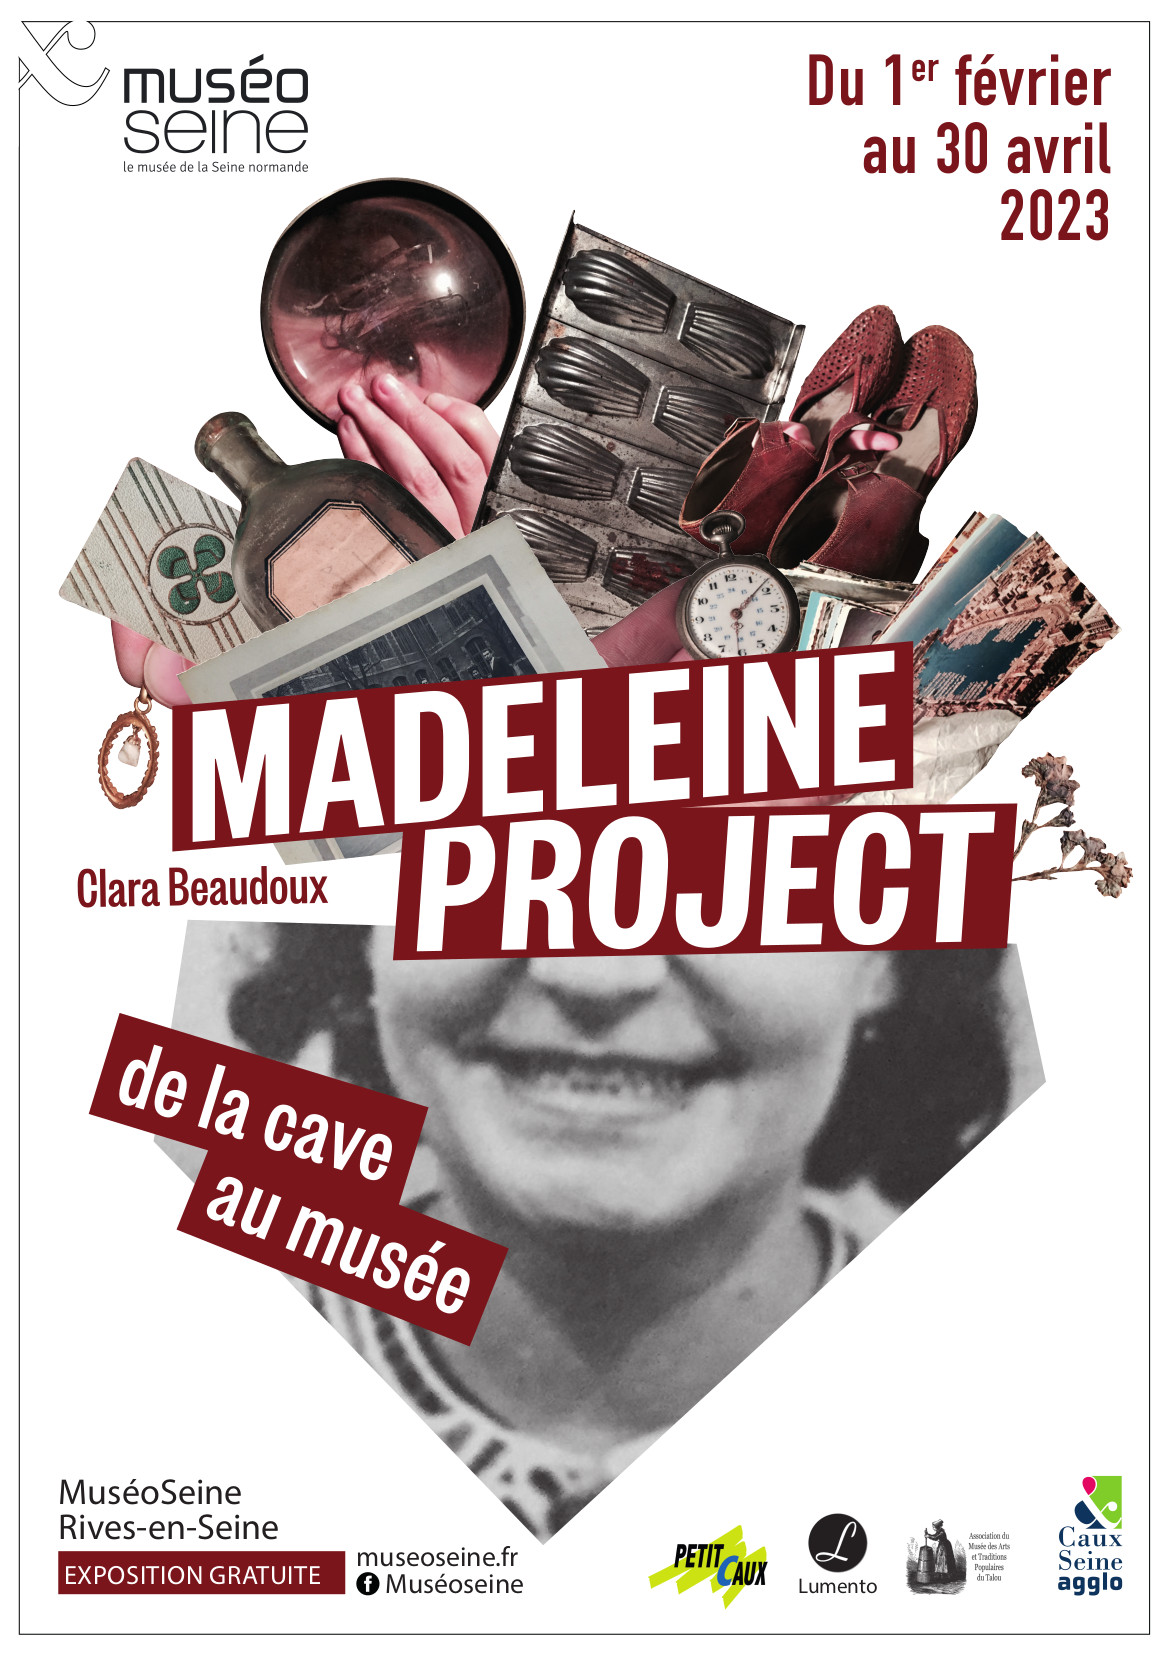 AFF_2022_EXPO-MADELEINE-PROJECT-MUSEO